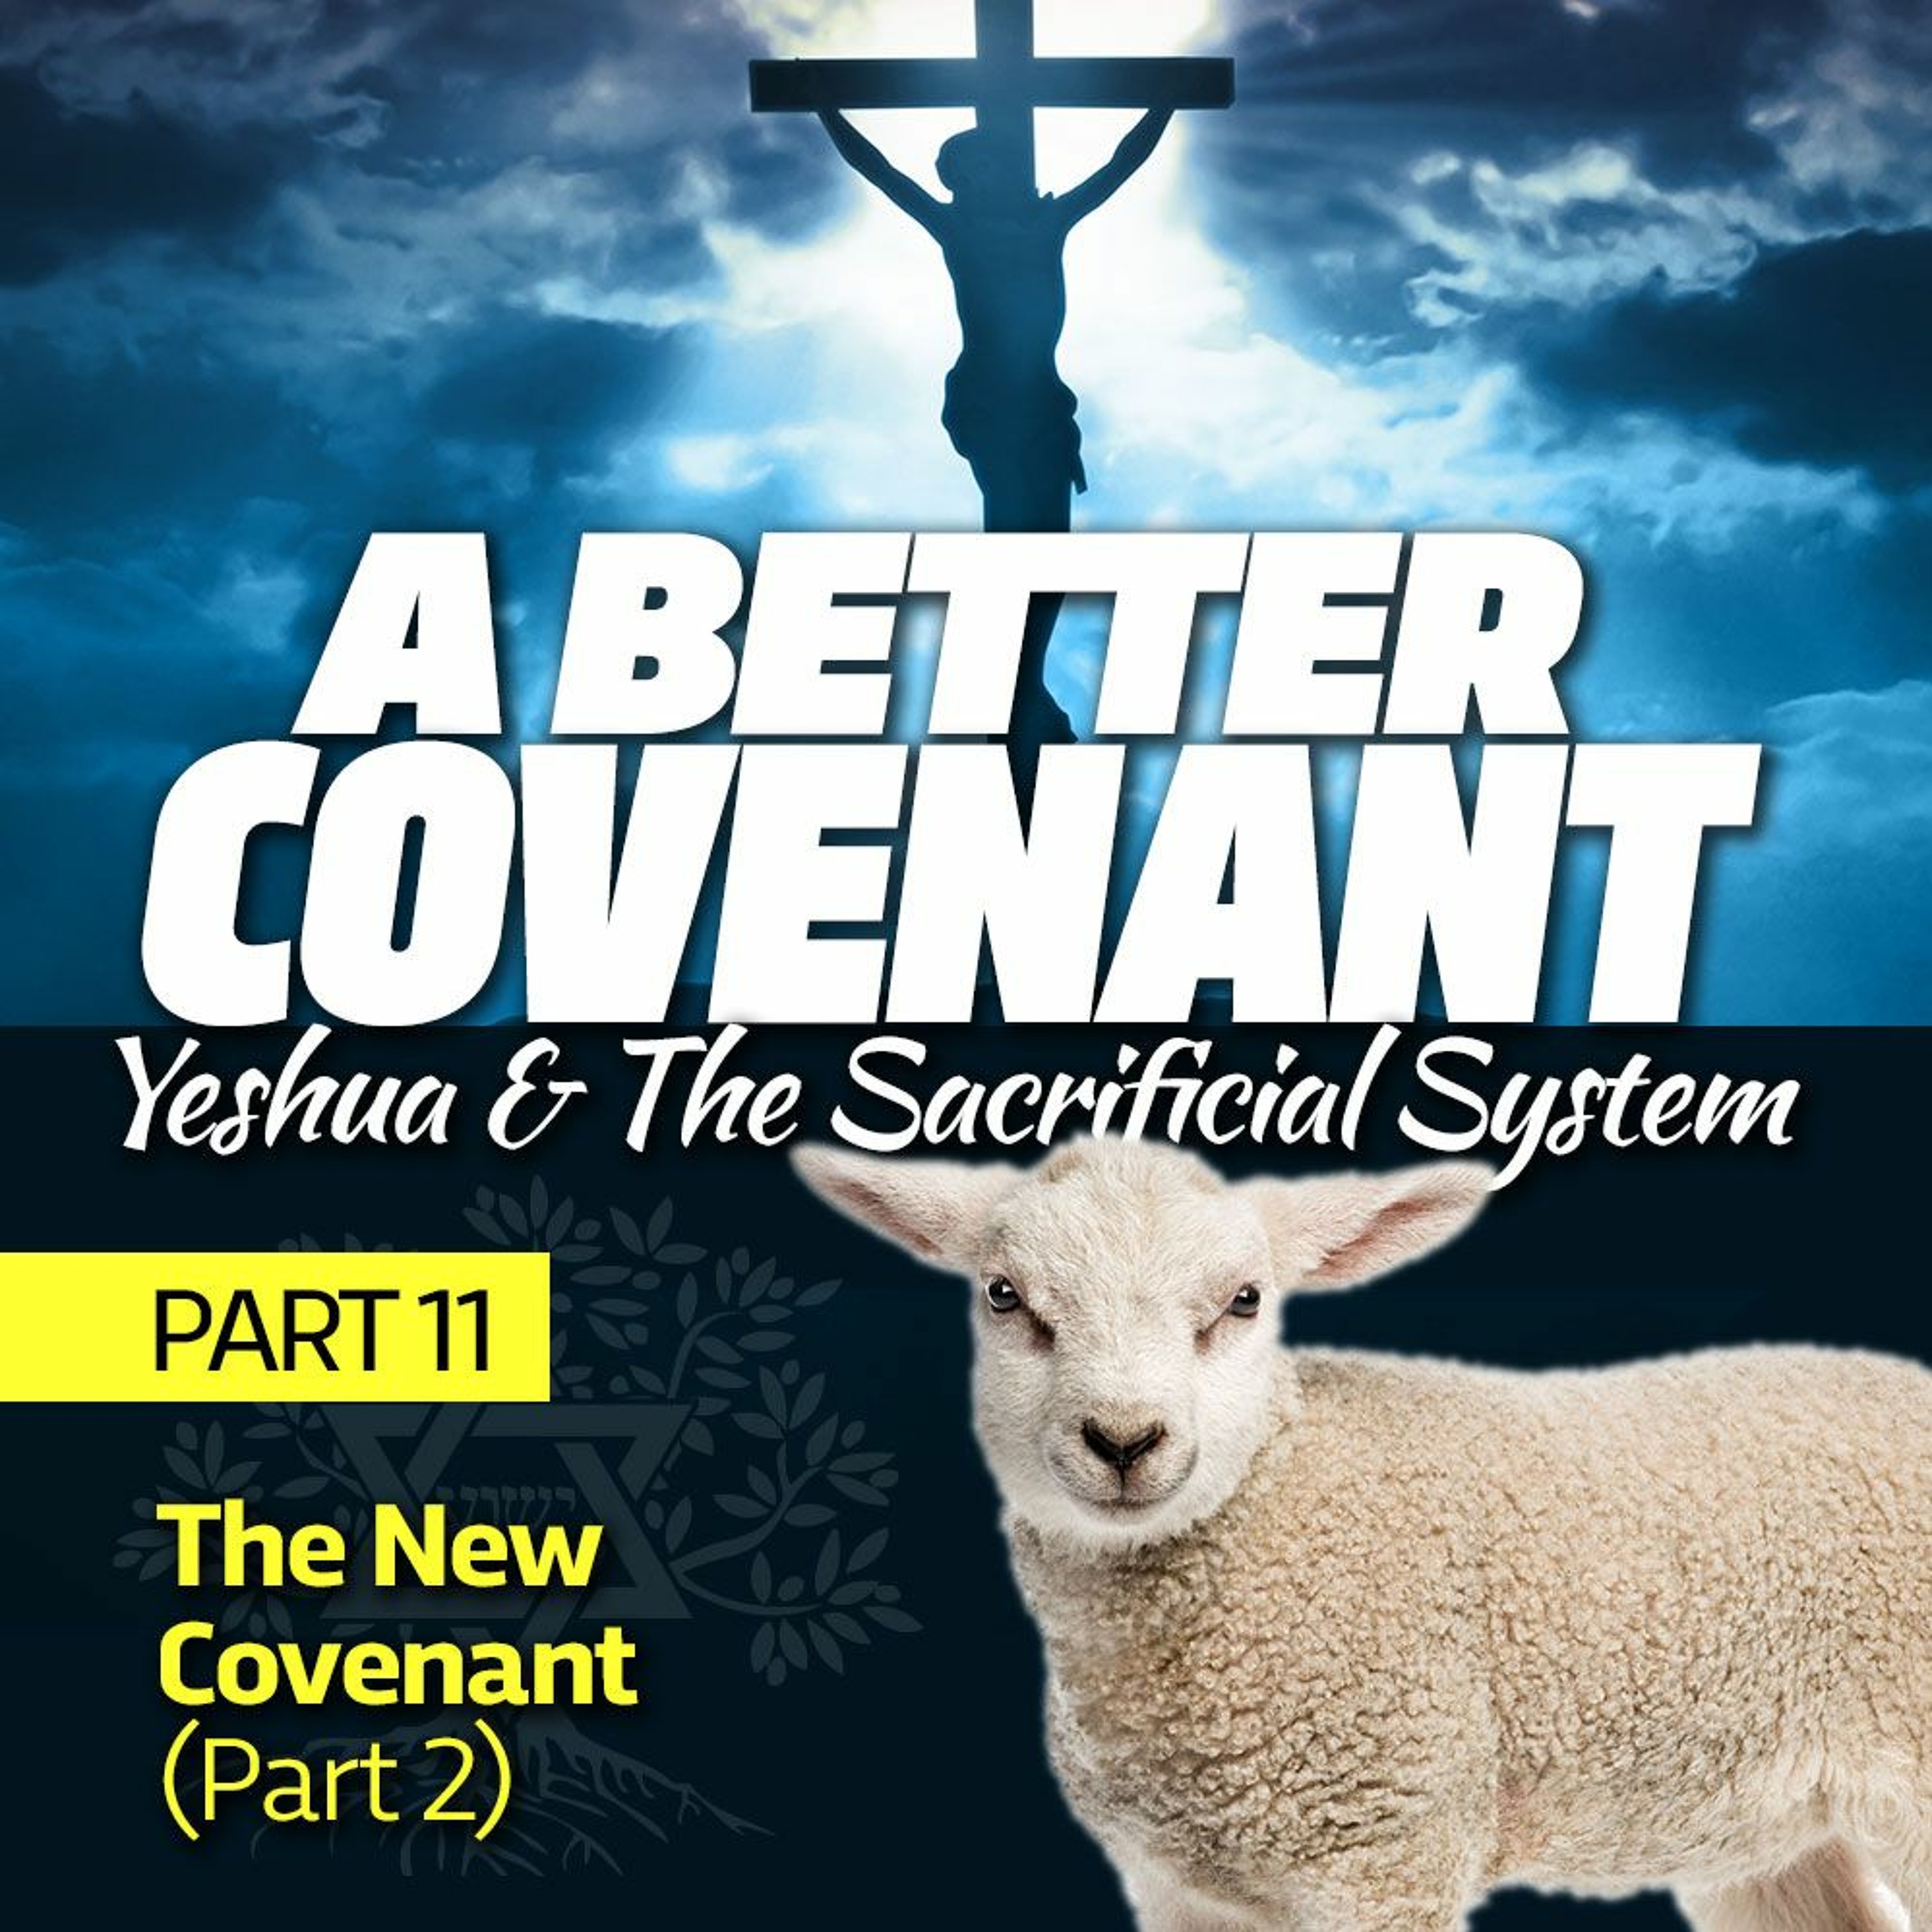 The New Covenant (Part 2)